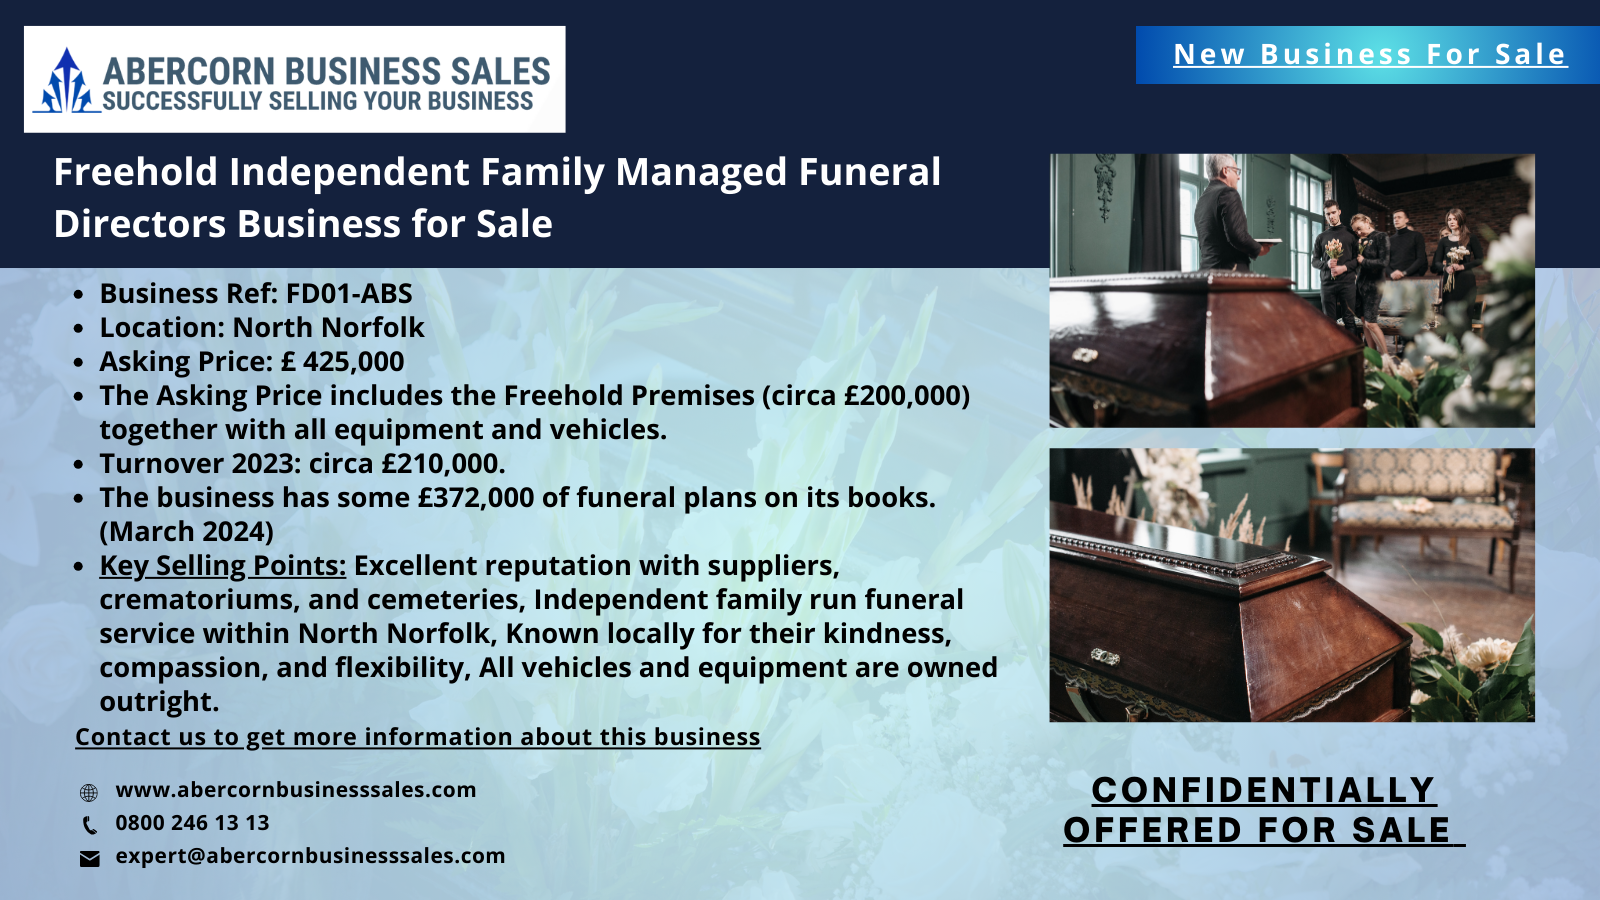 FD01-ABS - Freehold Independent Family Managed Funeral Directors Business for Sale